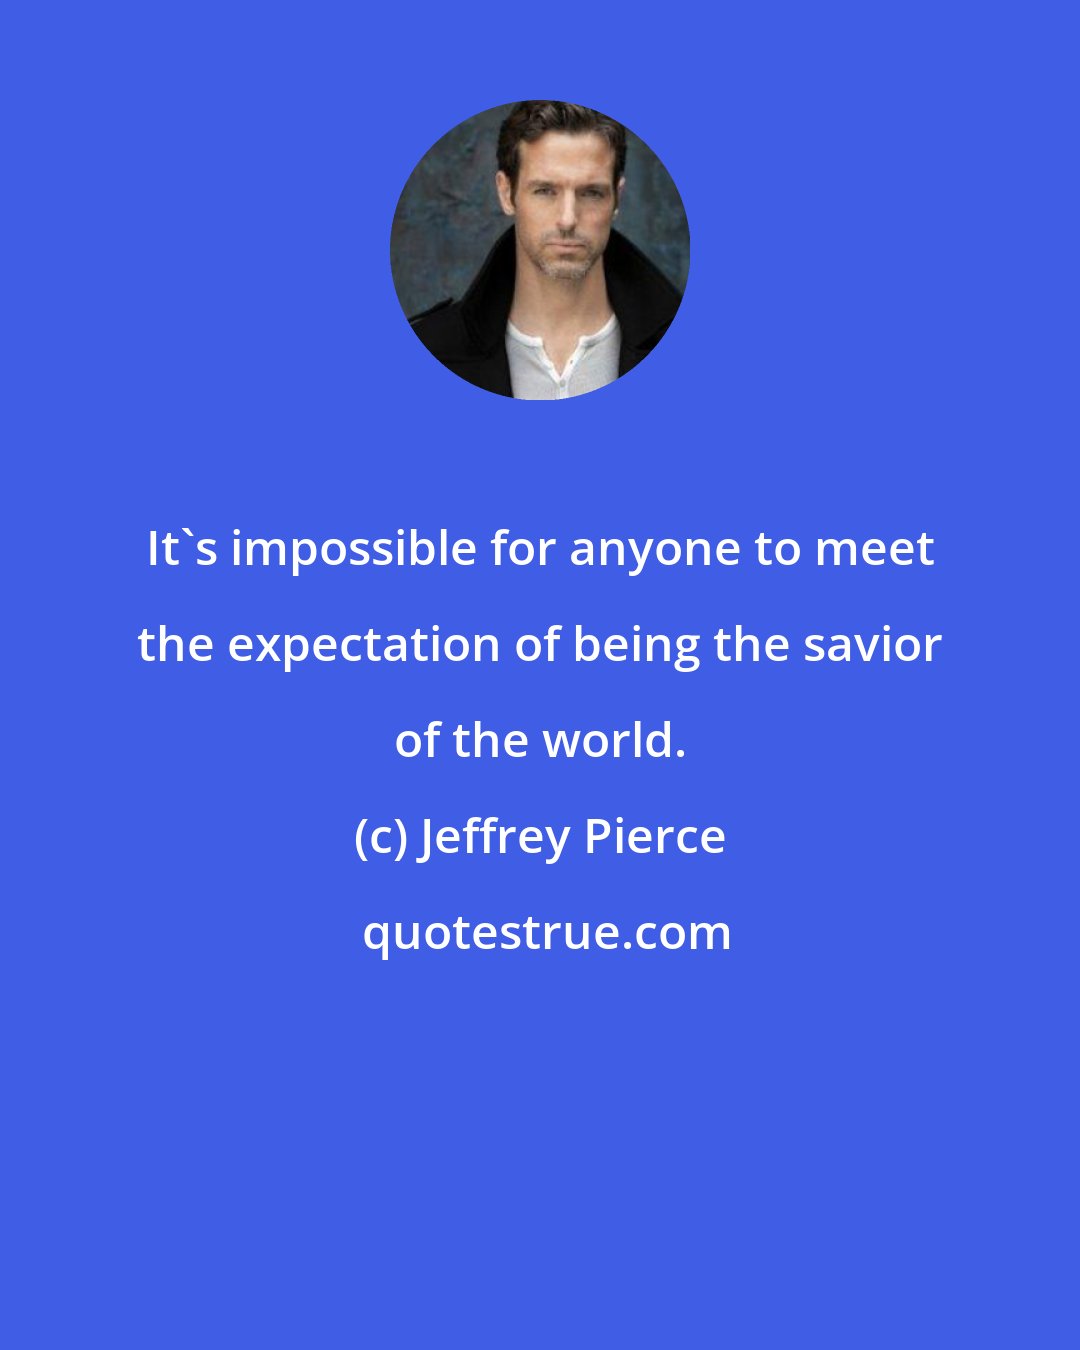 Jeffrey Pierce: It's impossible for anyone to meet the expectation of being the savior of the world.